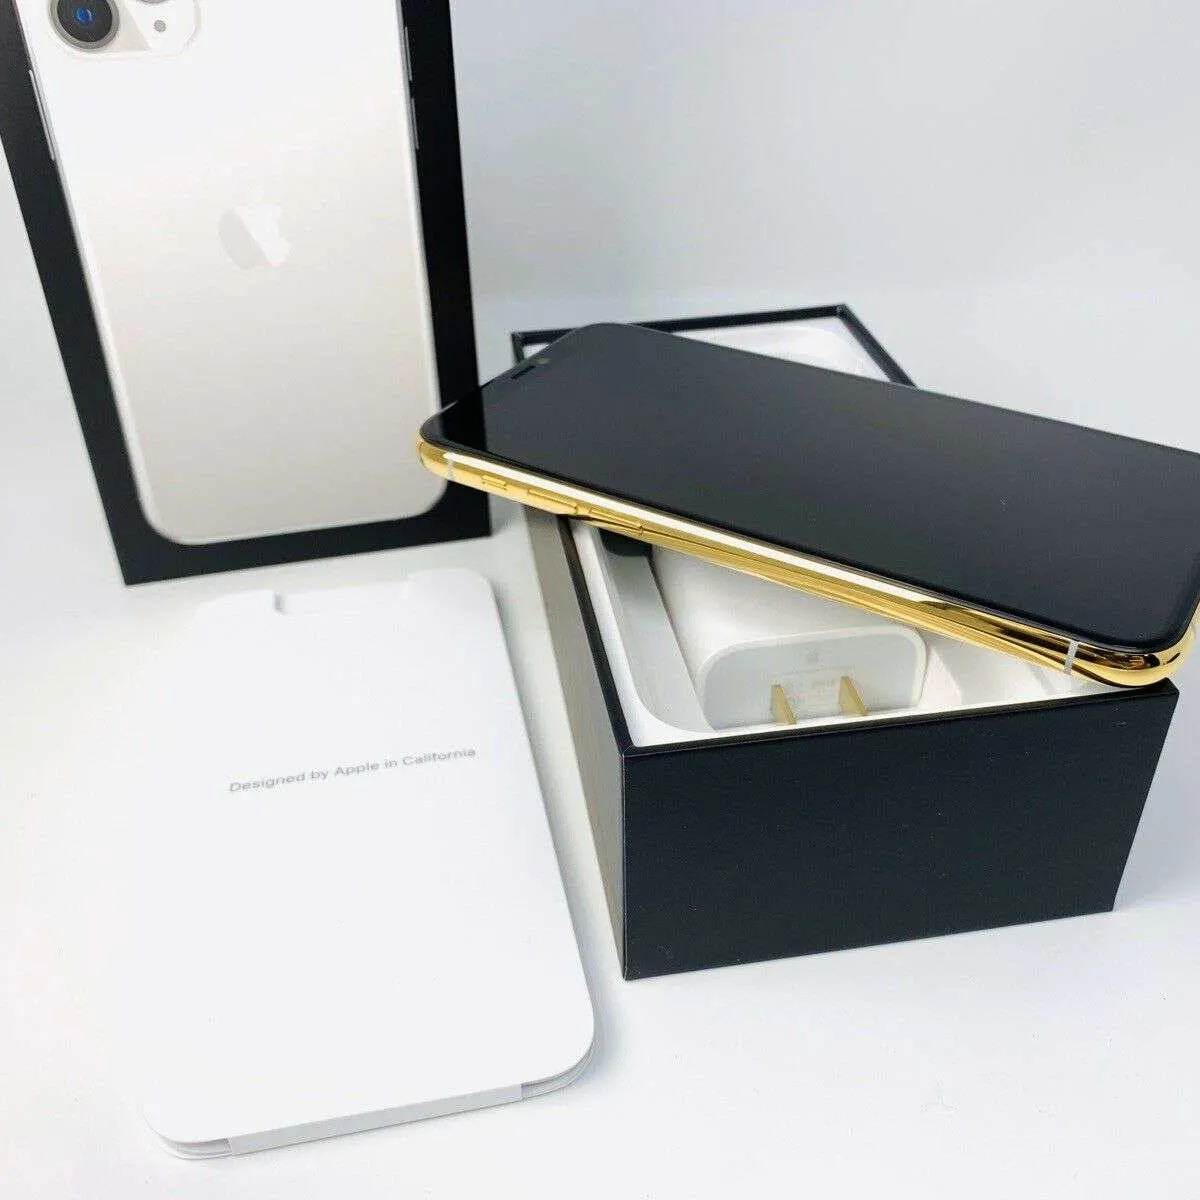 24K Gold Plated Apple iPhone 11 Pro Max - 512GB Silver Unlocked photo 4